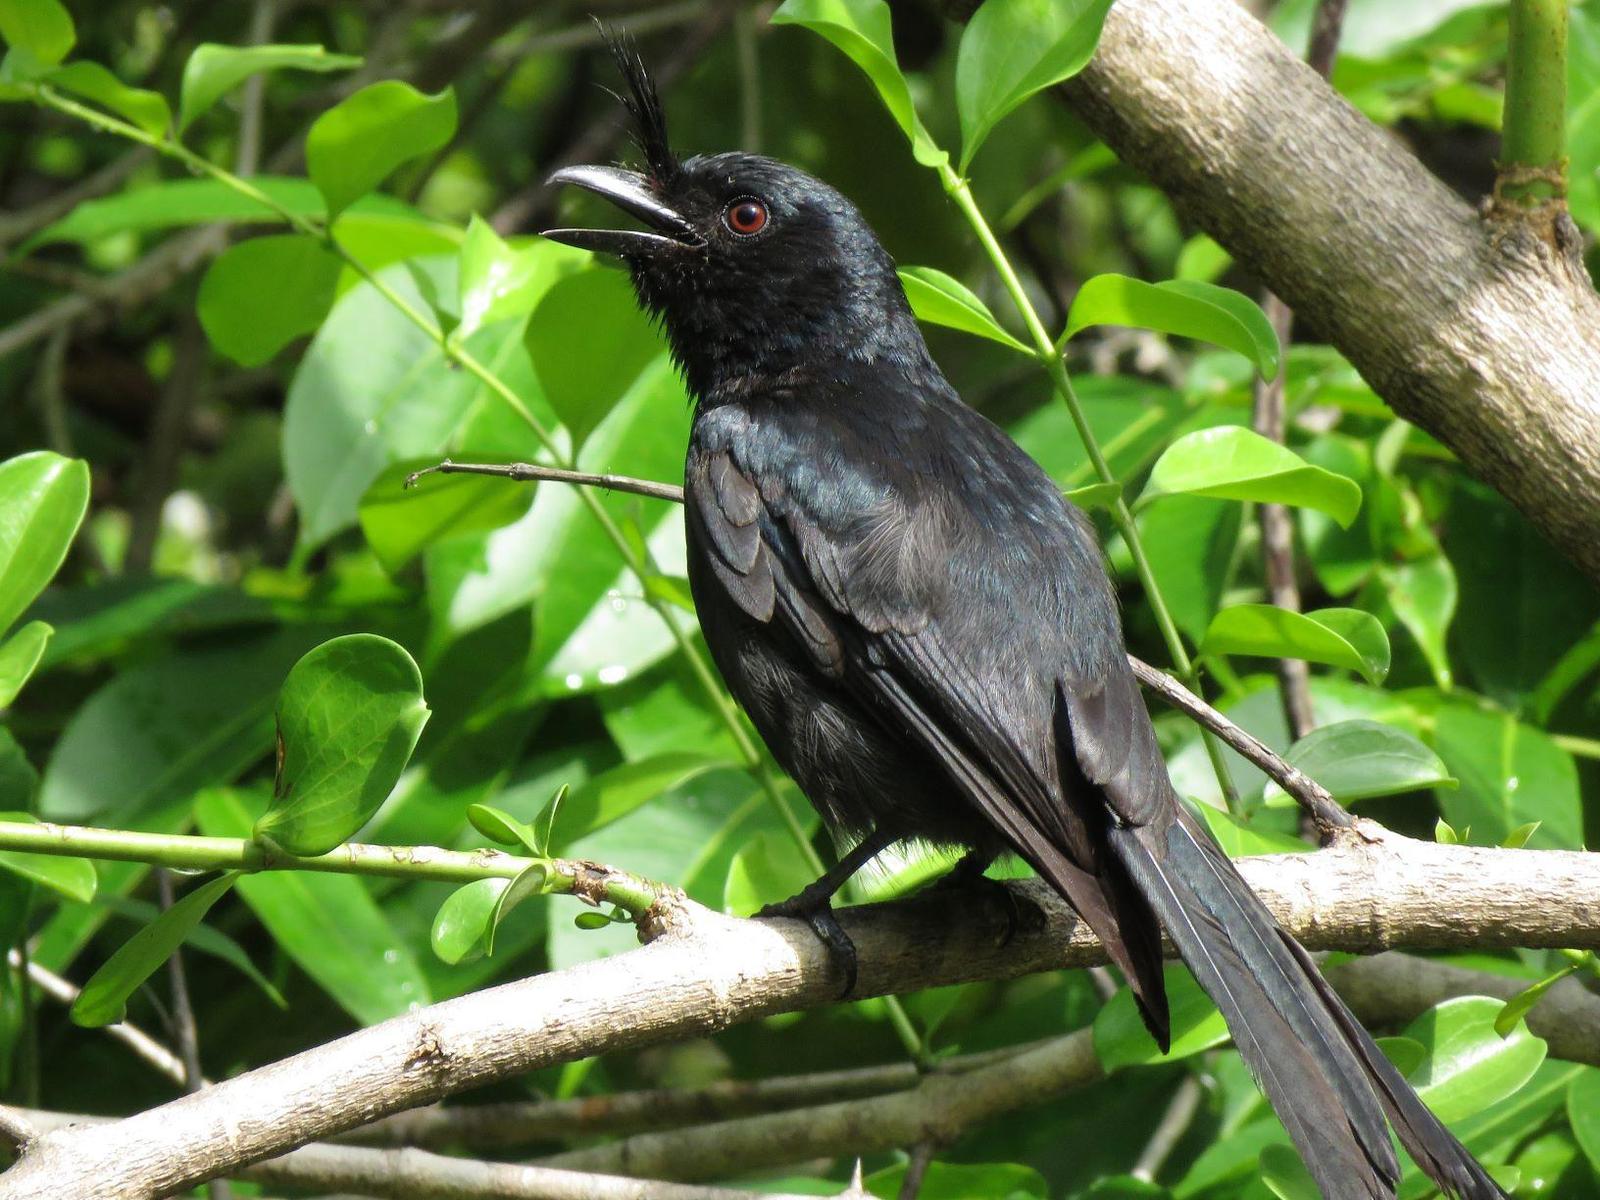 Crested Drongo Photo by Cyndee Pelt